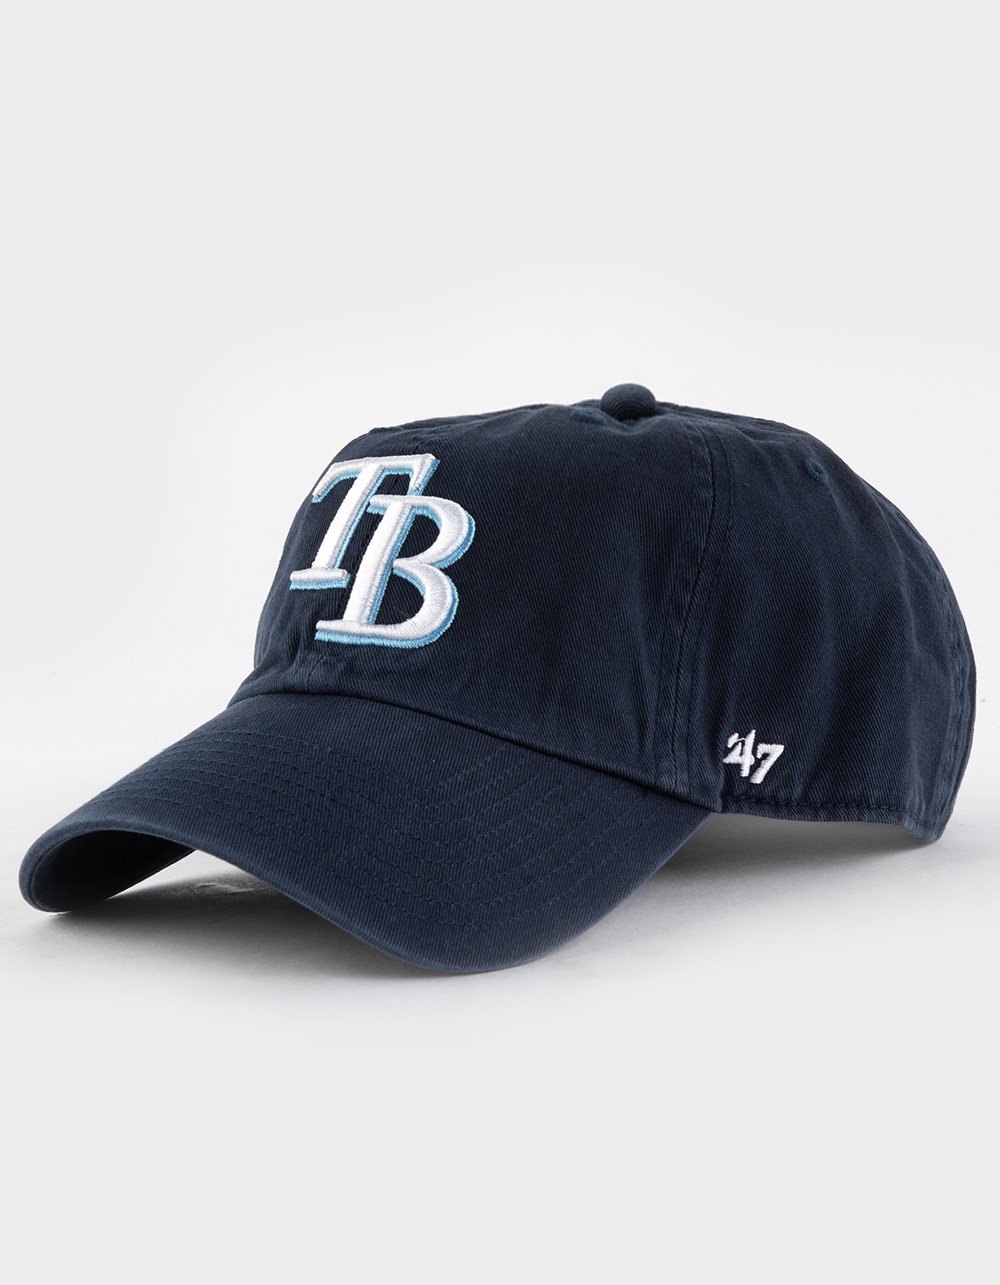 47 Brand Men's Navy Tampa Bay Rays Clean Up Adjustable Hat | Dick's Sporting Goods